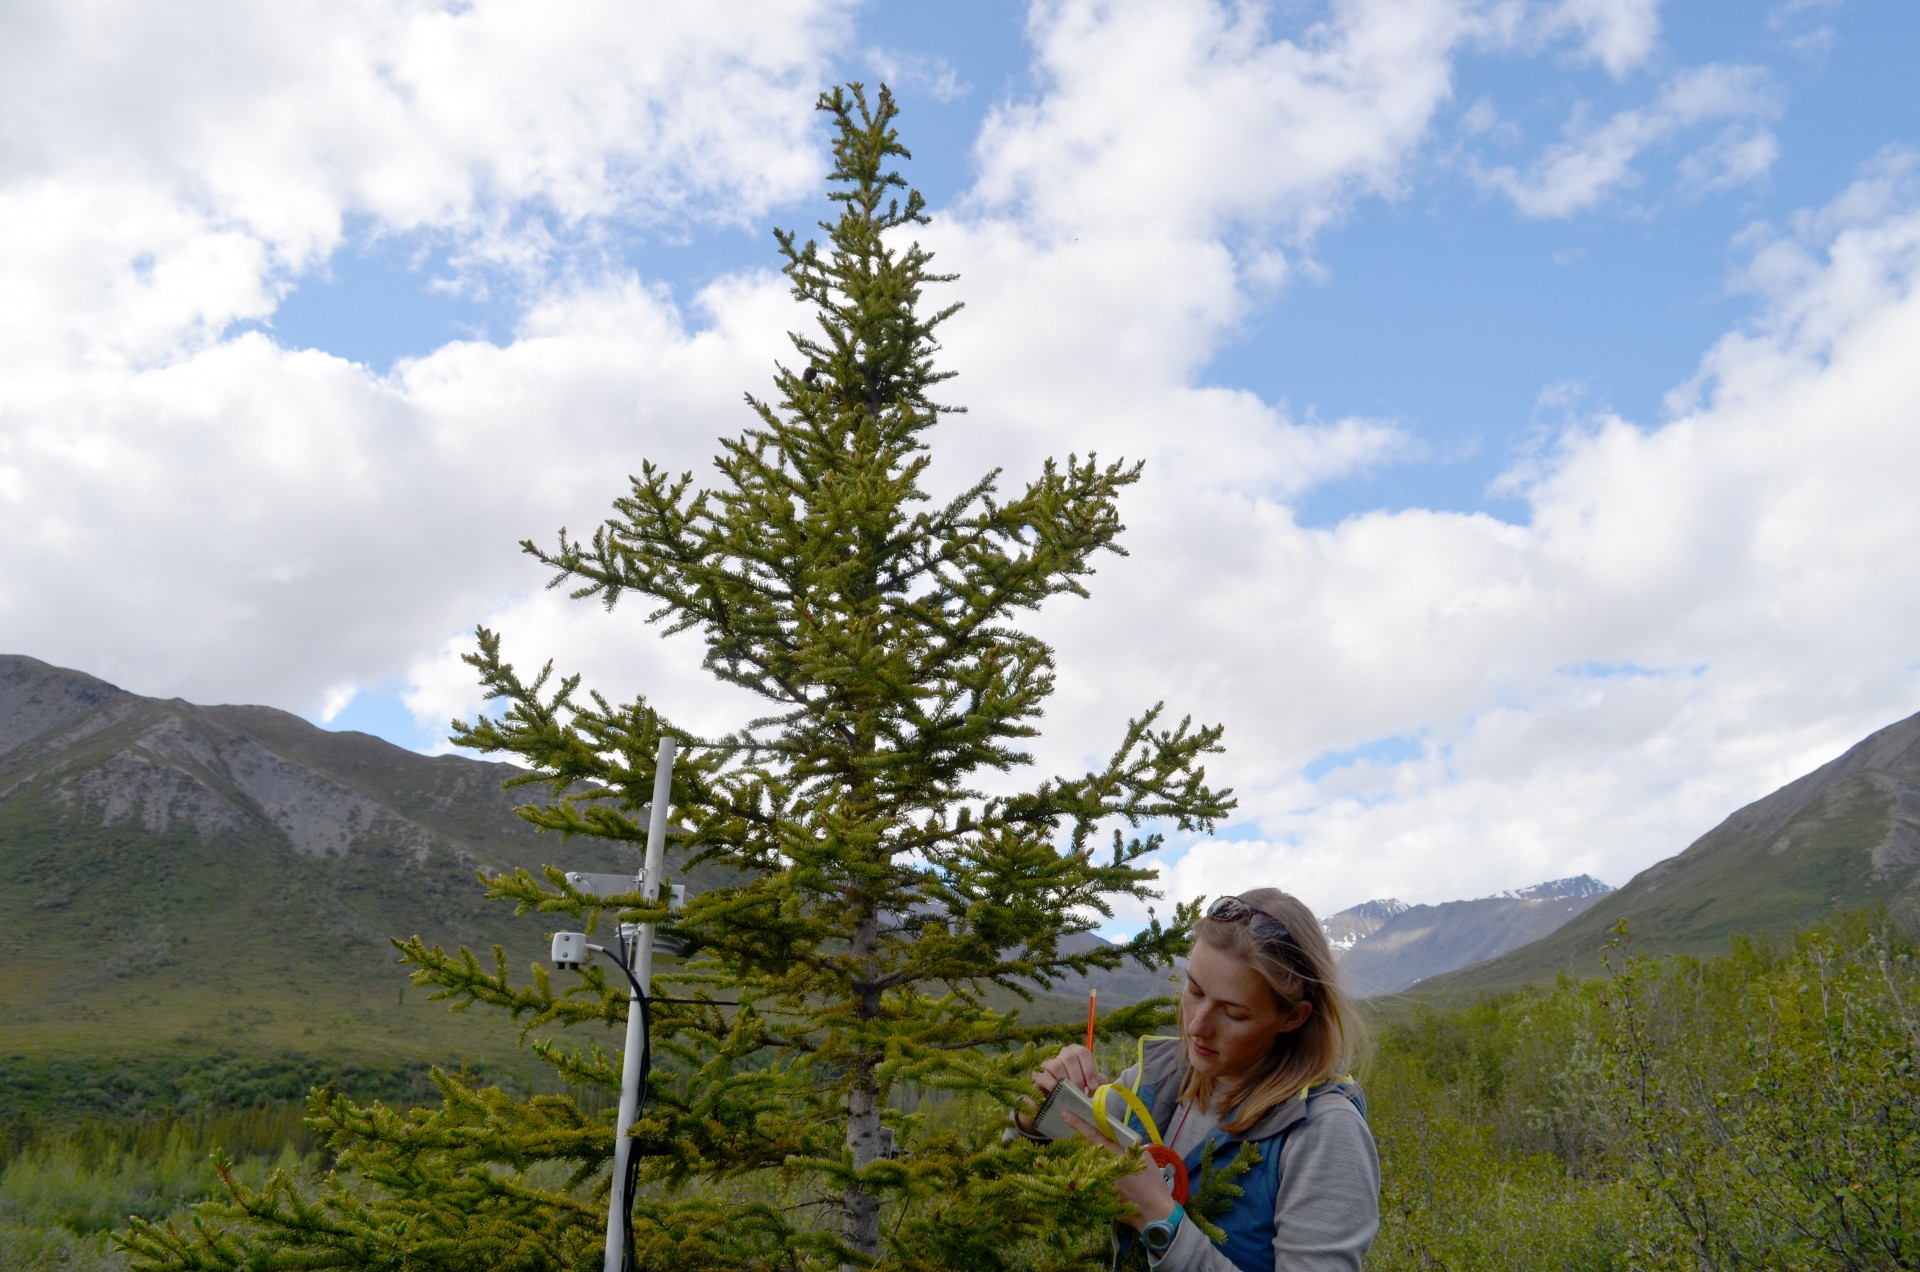 On her first trip to the north, Lamont-Doherty graduate student Johanna Jensen takes down data on a wired-up spruce. The study will provide not only long-term information on climate change, but opportunities for young scientists to work directly in the field.